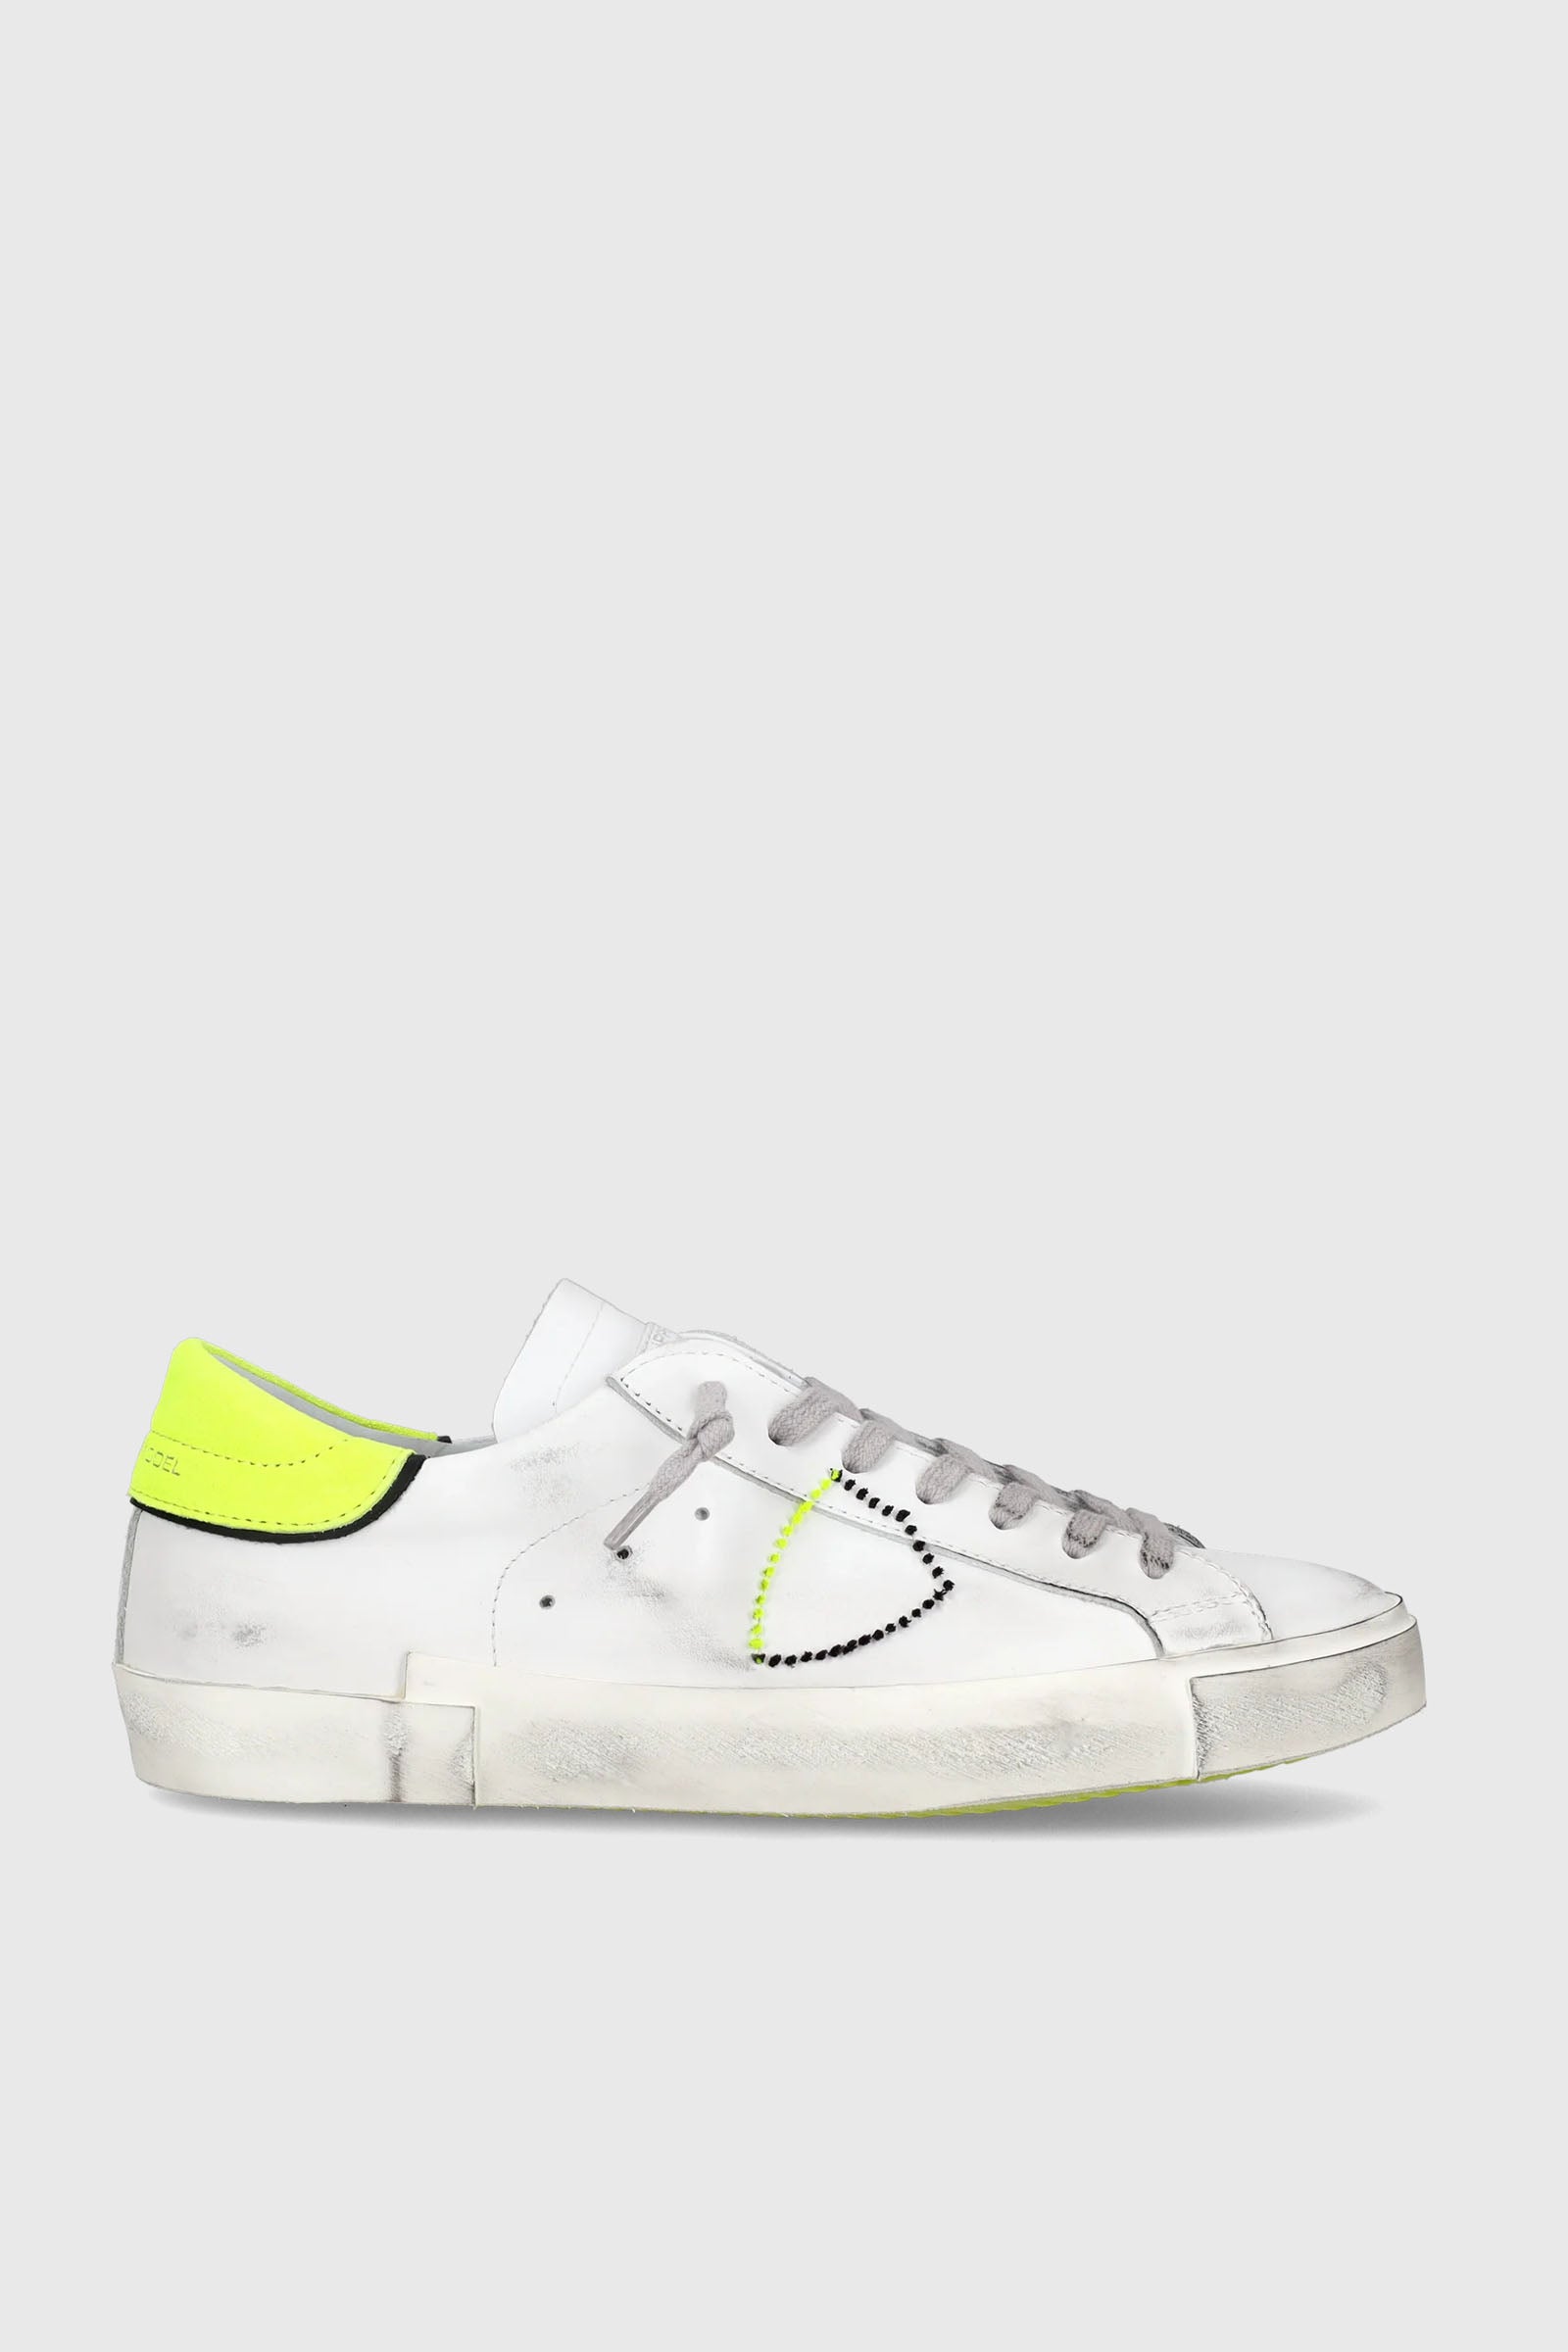 Philippe Model Sneakers PRSX Veau Broderie Leather White/Yellow Fluo - 1